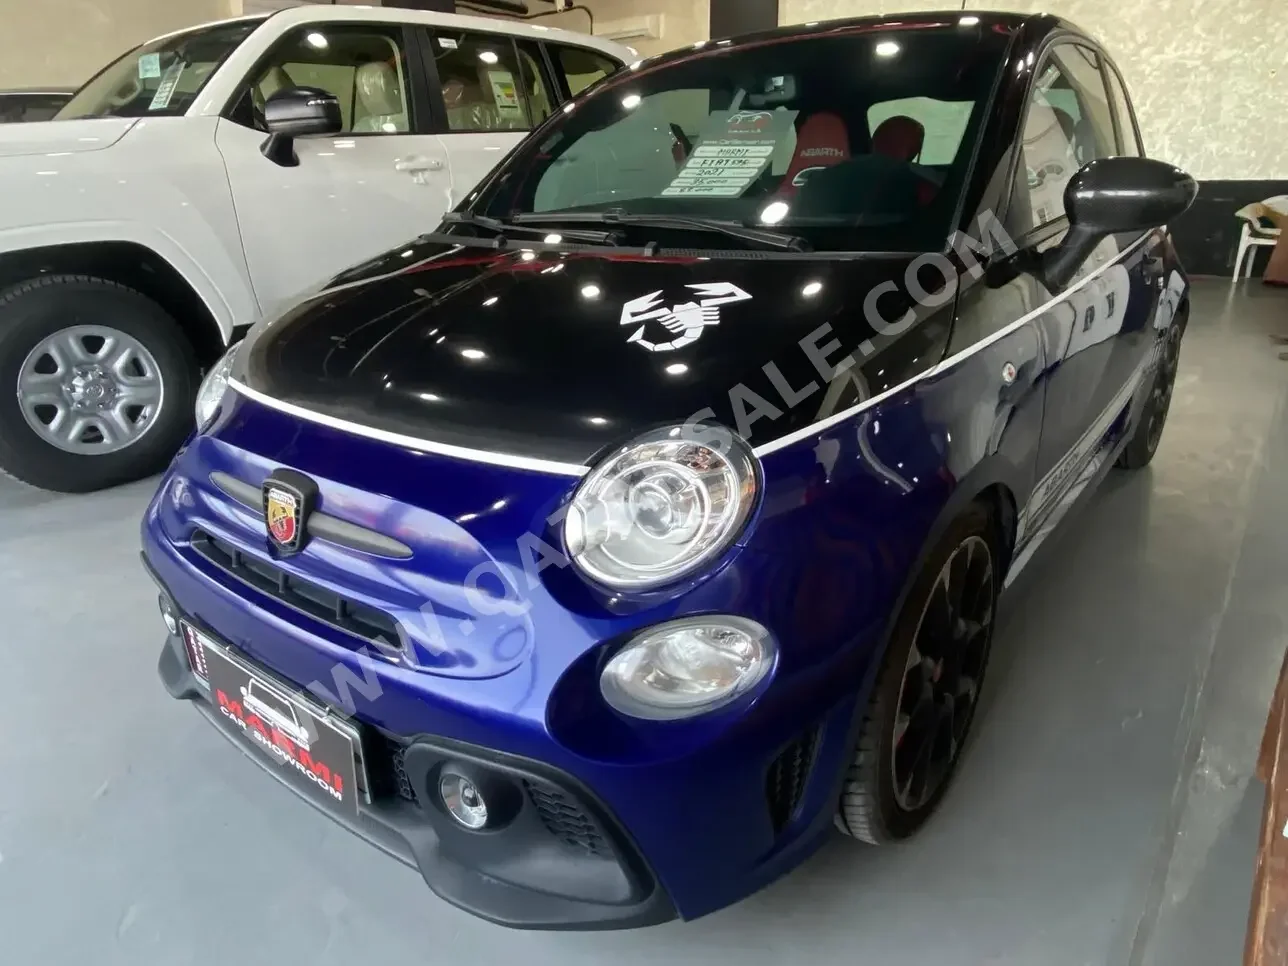 Fiat  500  Abarth  2021  Automatic  35,000 Km  4 Cylinder  Front Wheel Drive (FWD)  Hatchback  Blue